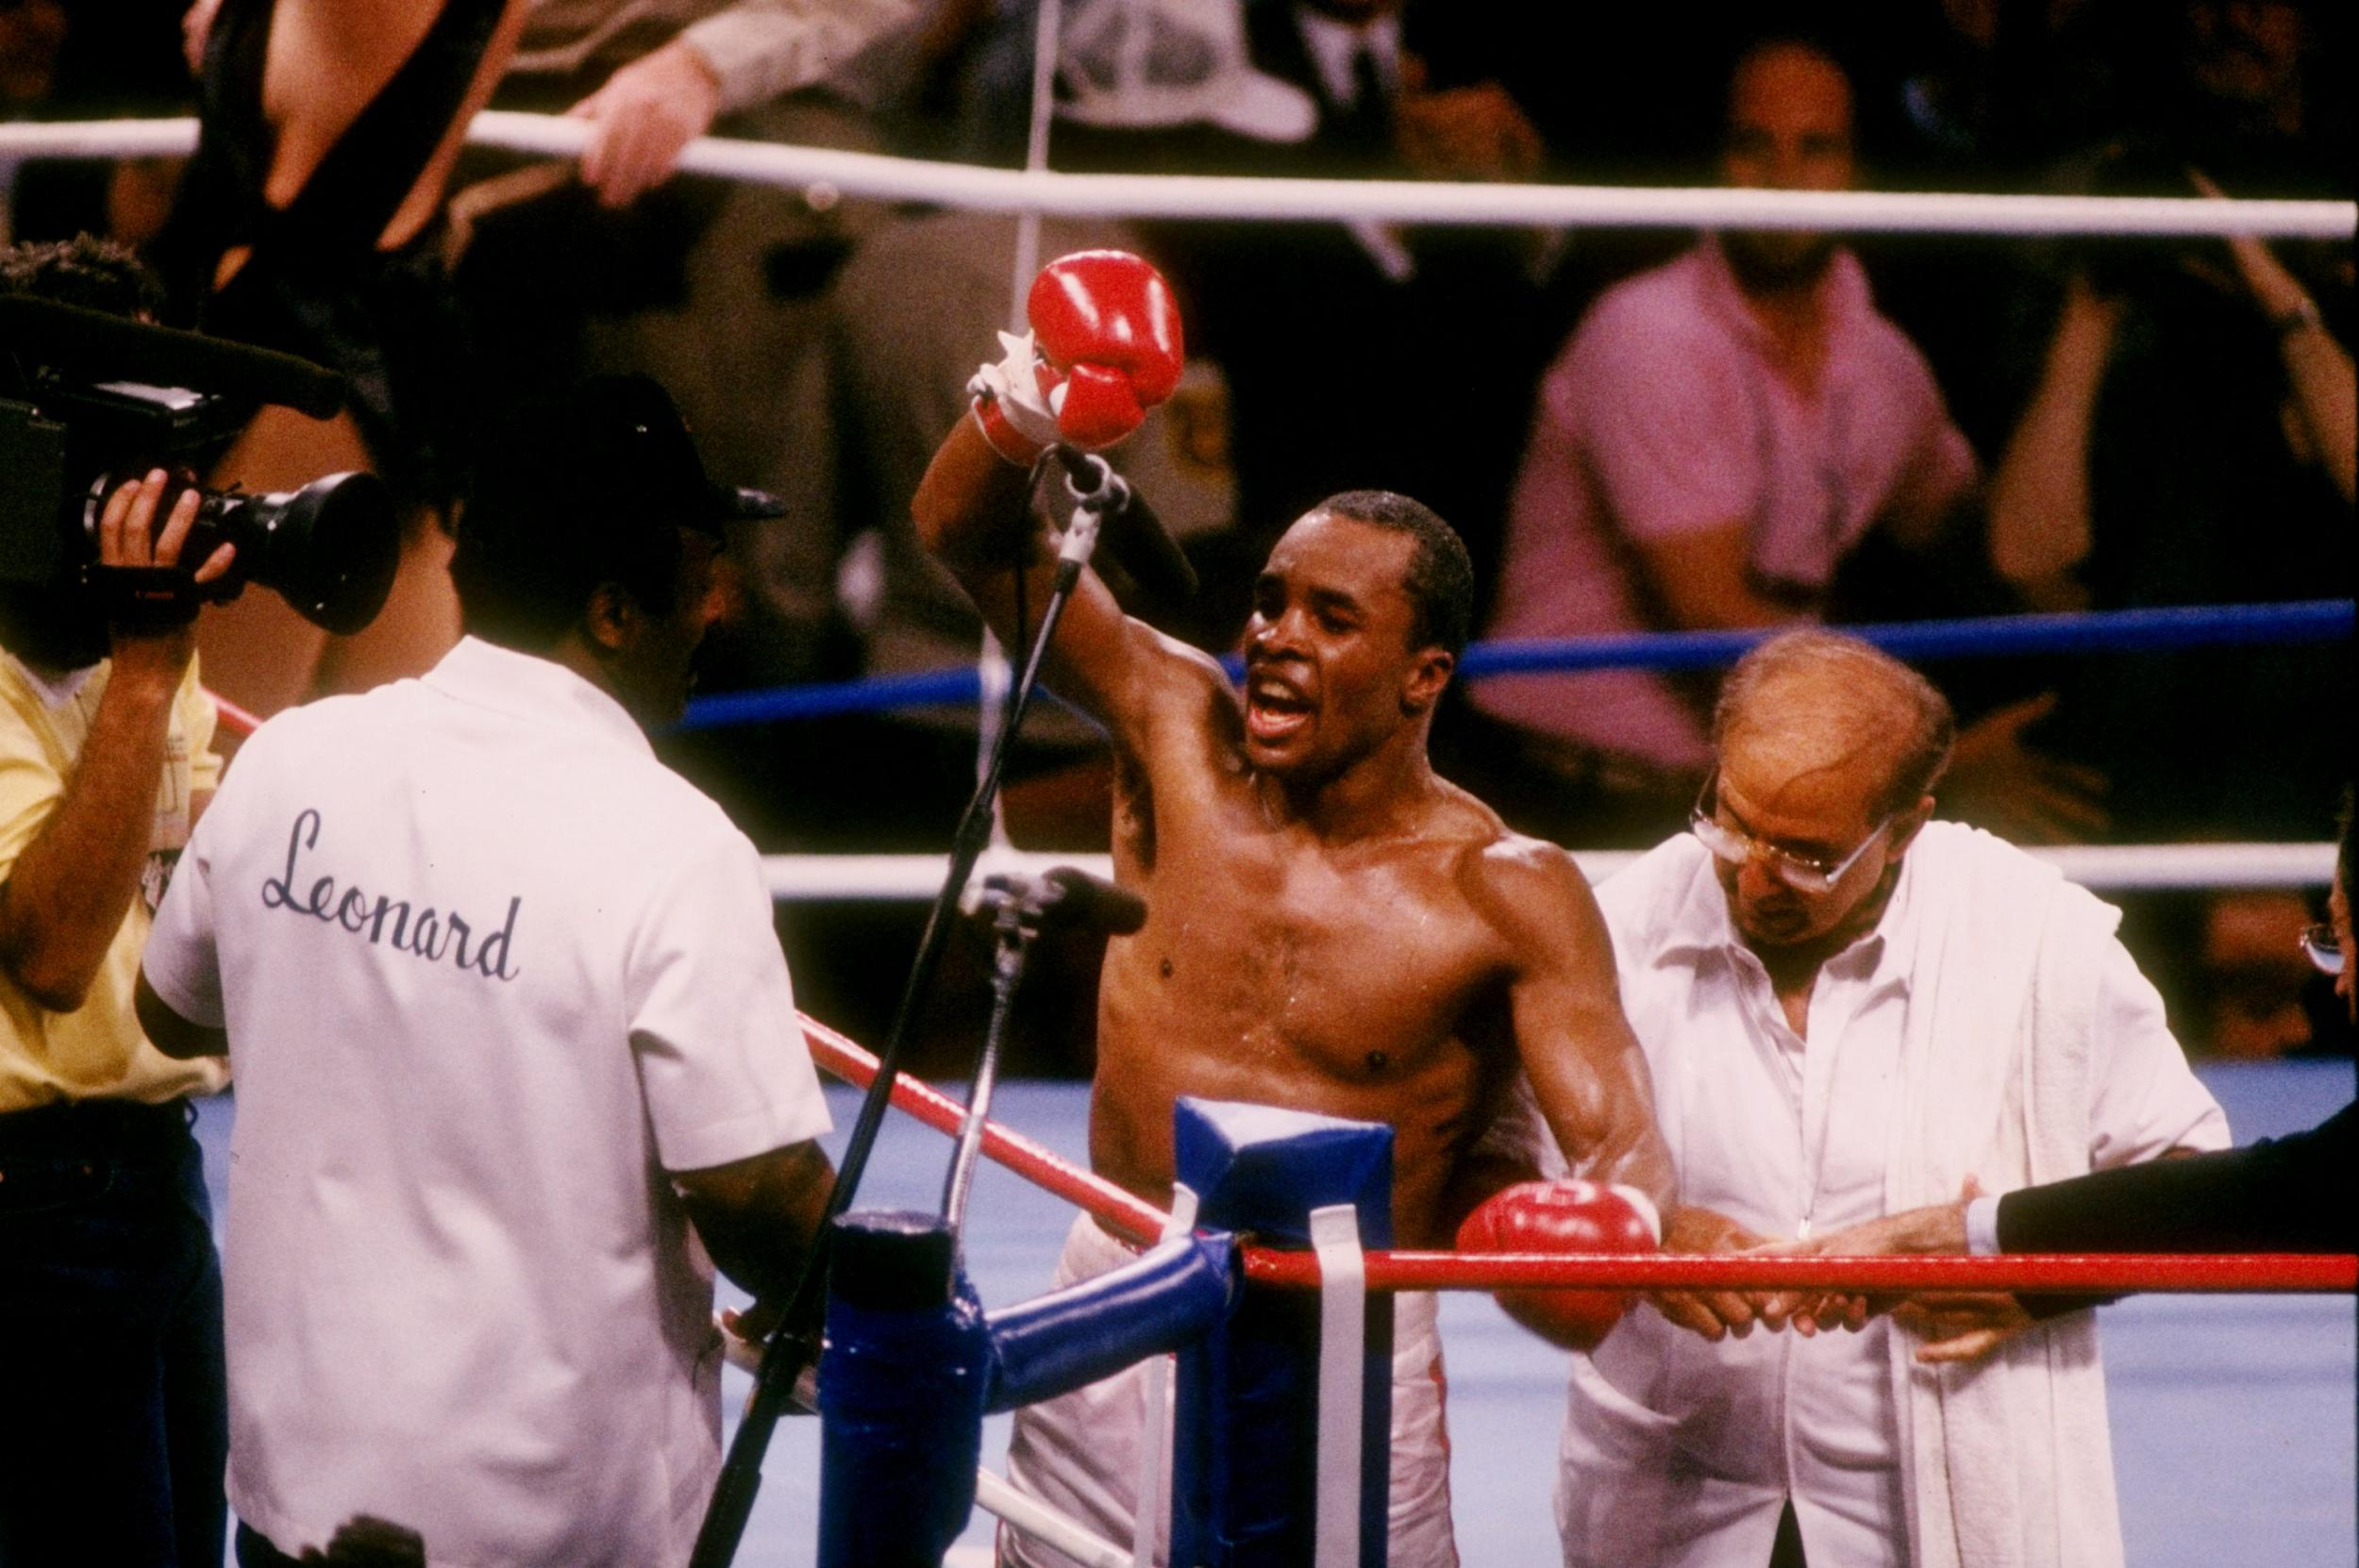 Leonard is one of boxing's most famous figures